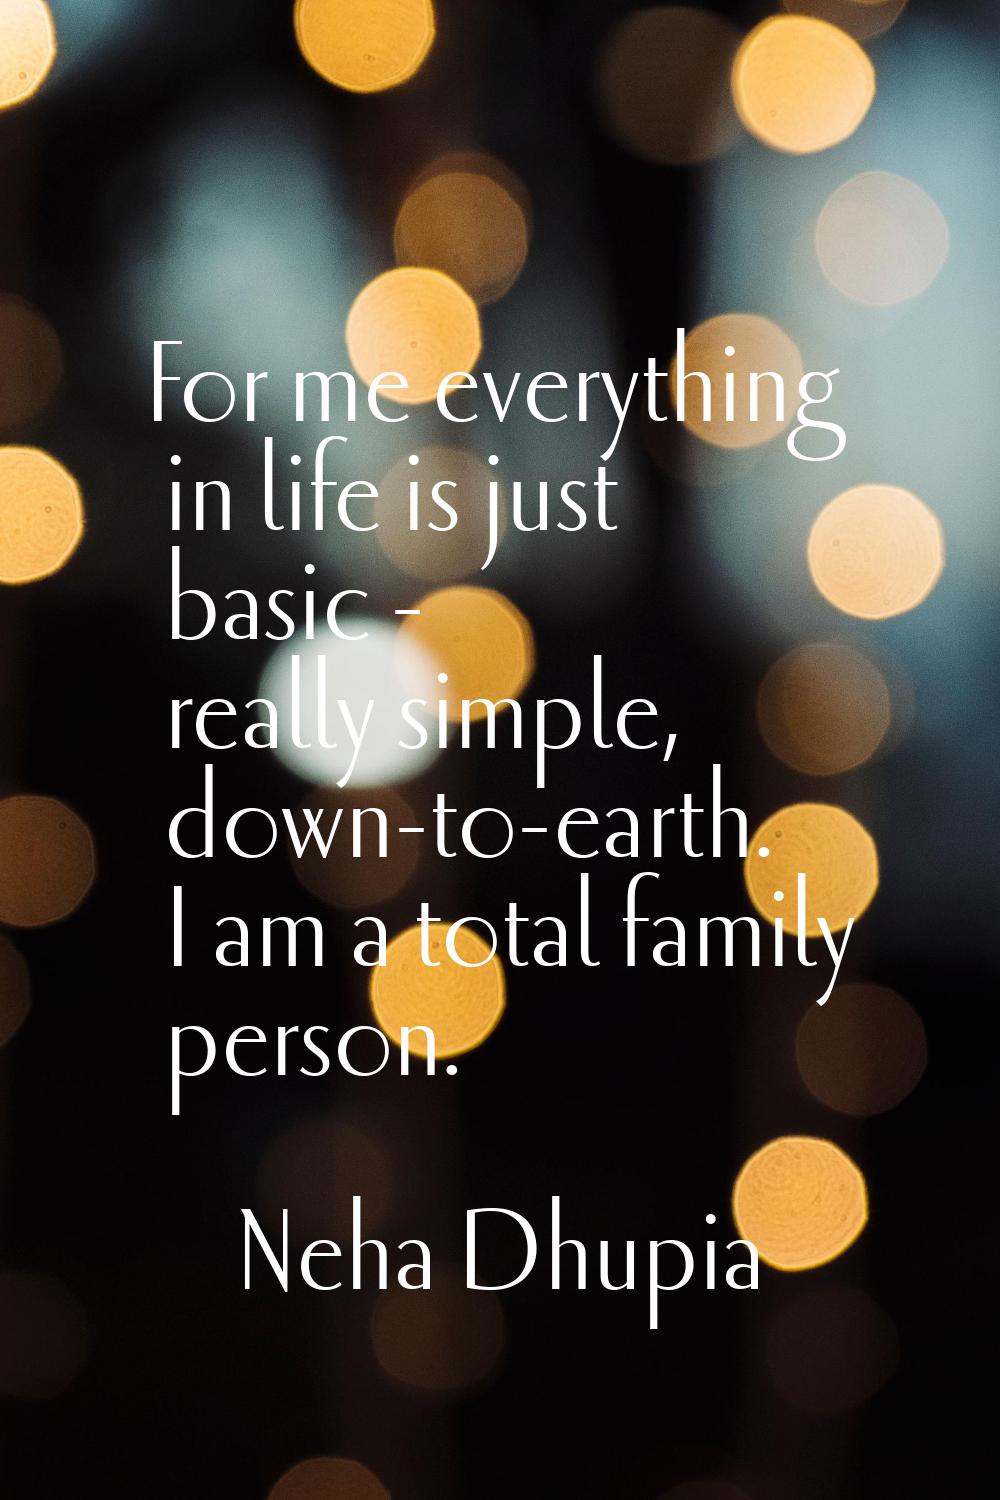 For me everything in life is just basic - really simple, down-to-earth. I am a total family person.